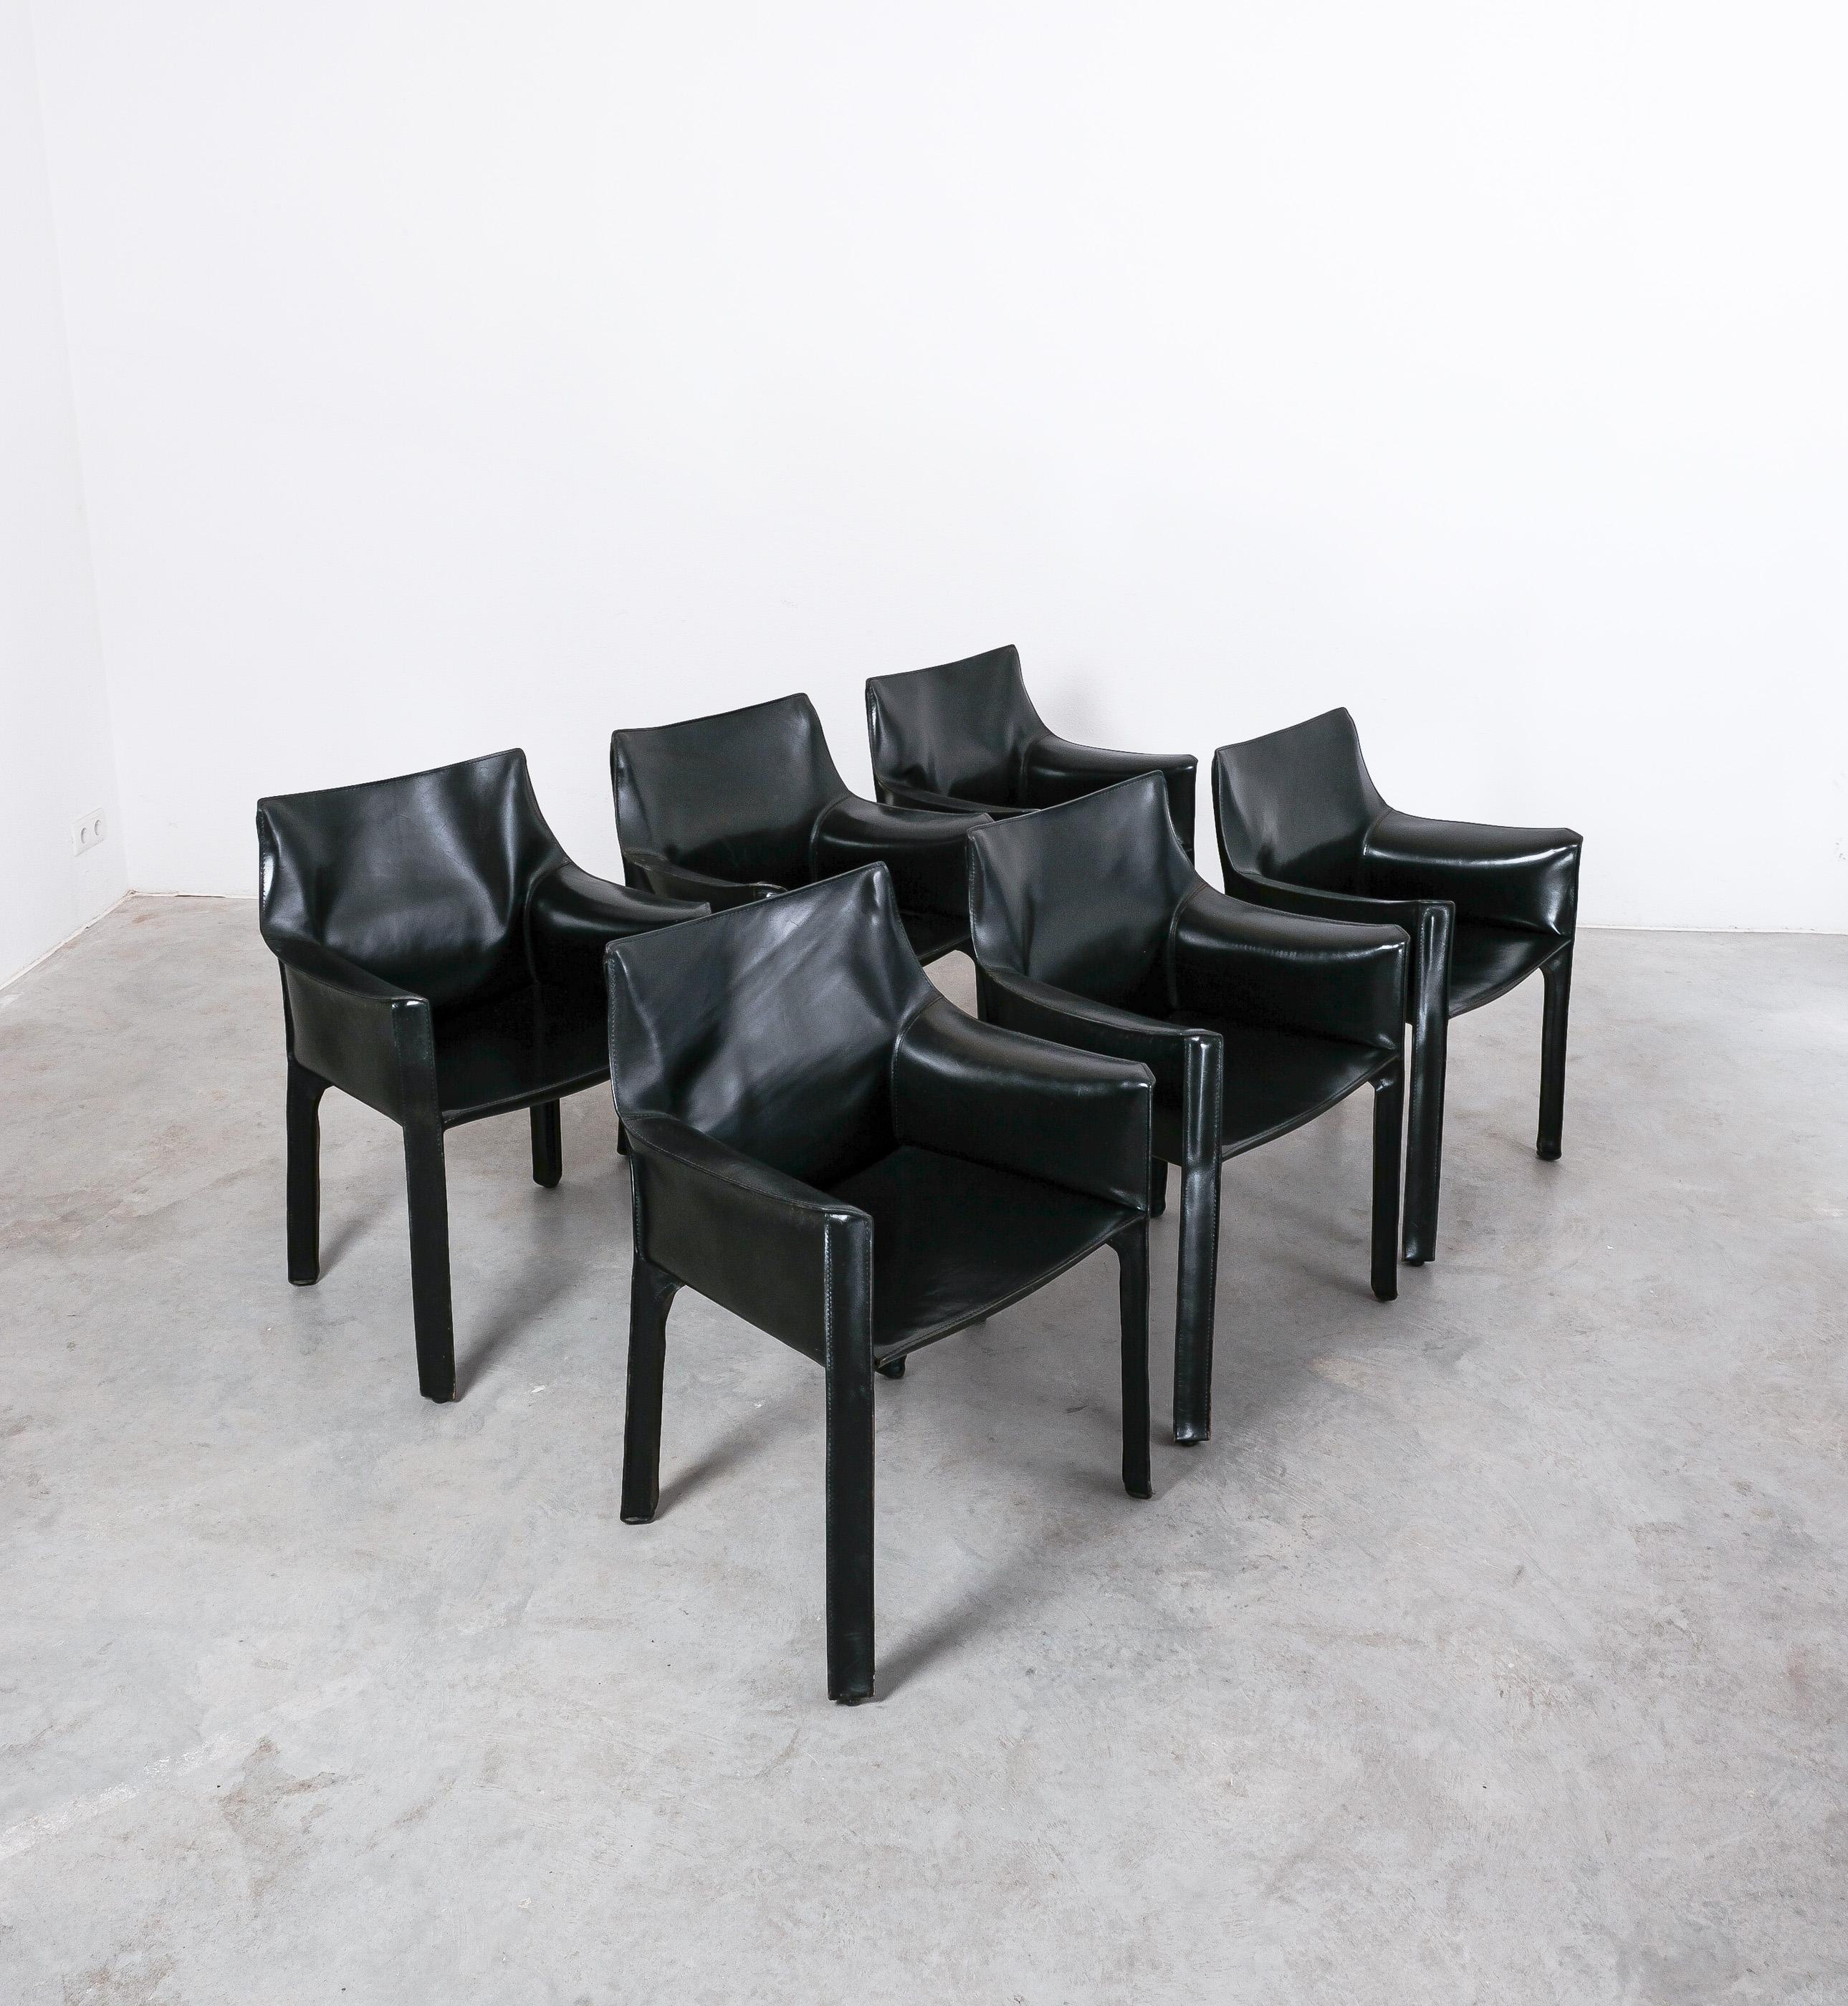 Set of 6 original 1980s cab 413 captains chairs by Mario Bellini for Cassina
We actually have up to 10 pieces available, please inquire
Early version around the 1980s. All are labelled and in good condition.

A set of 6 Italian design icons in